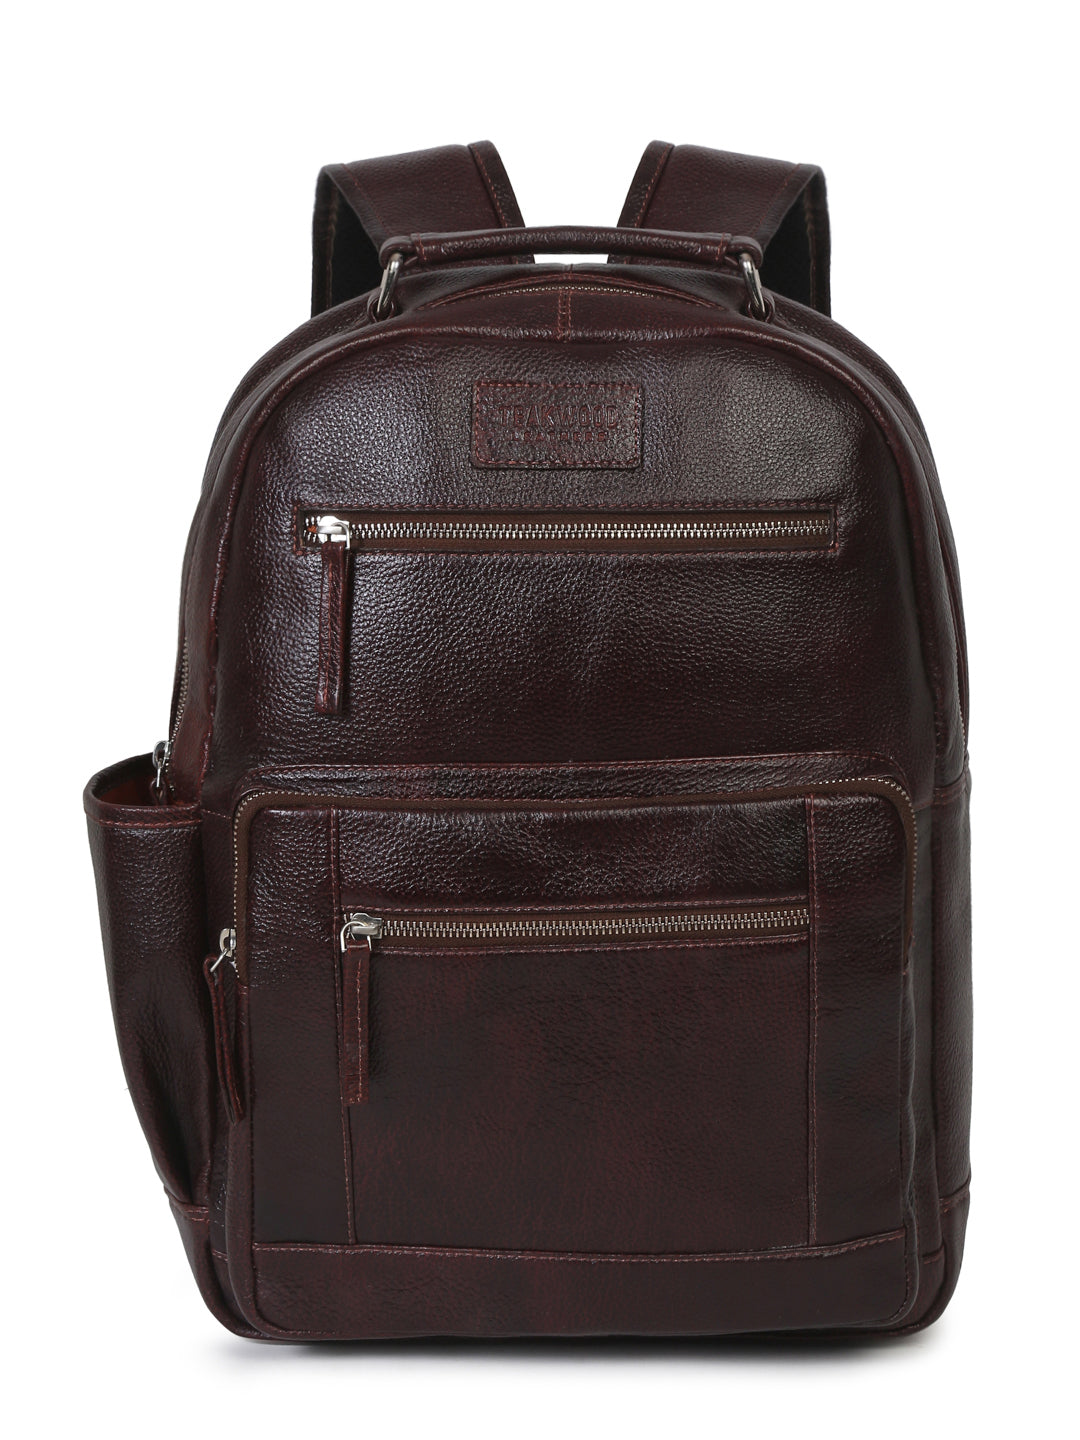 ZNT BAGS Dark brown handmade leather backpack bag for unisex : Amazon.in:  Fashion